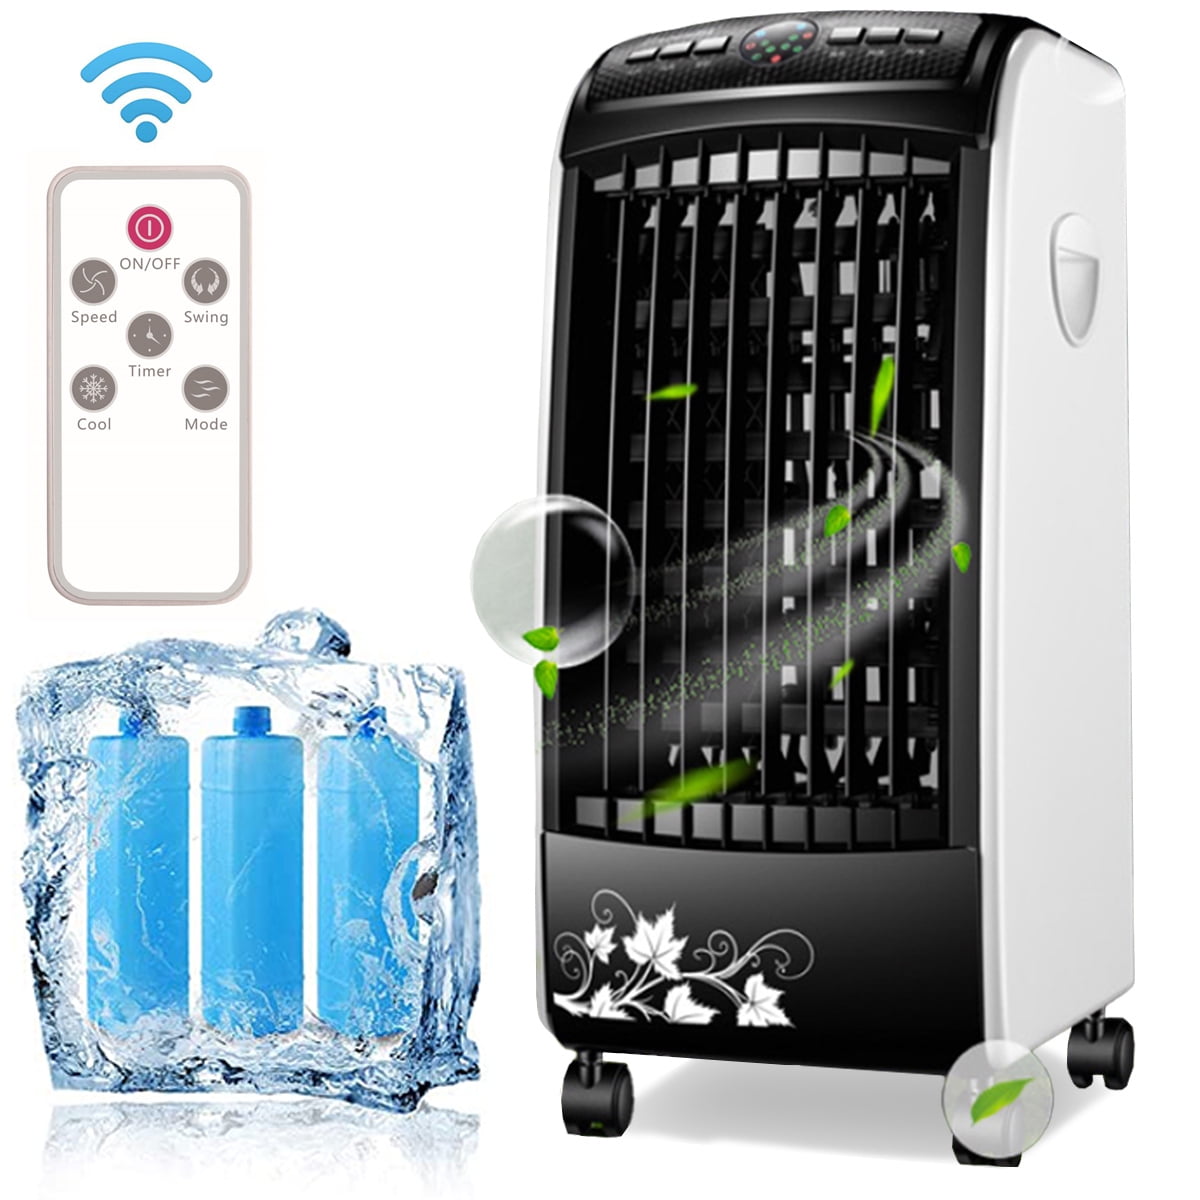 Måler Socialist matrix Evaporative Portable Air Cooler 3 Fan Settings with Cooling and Humidifier  - Walmart.com